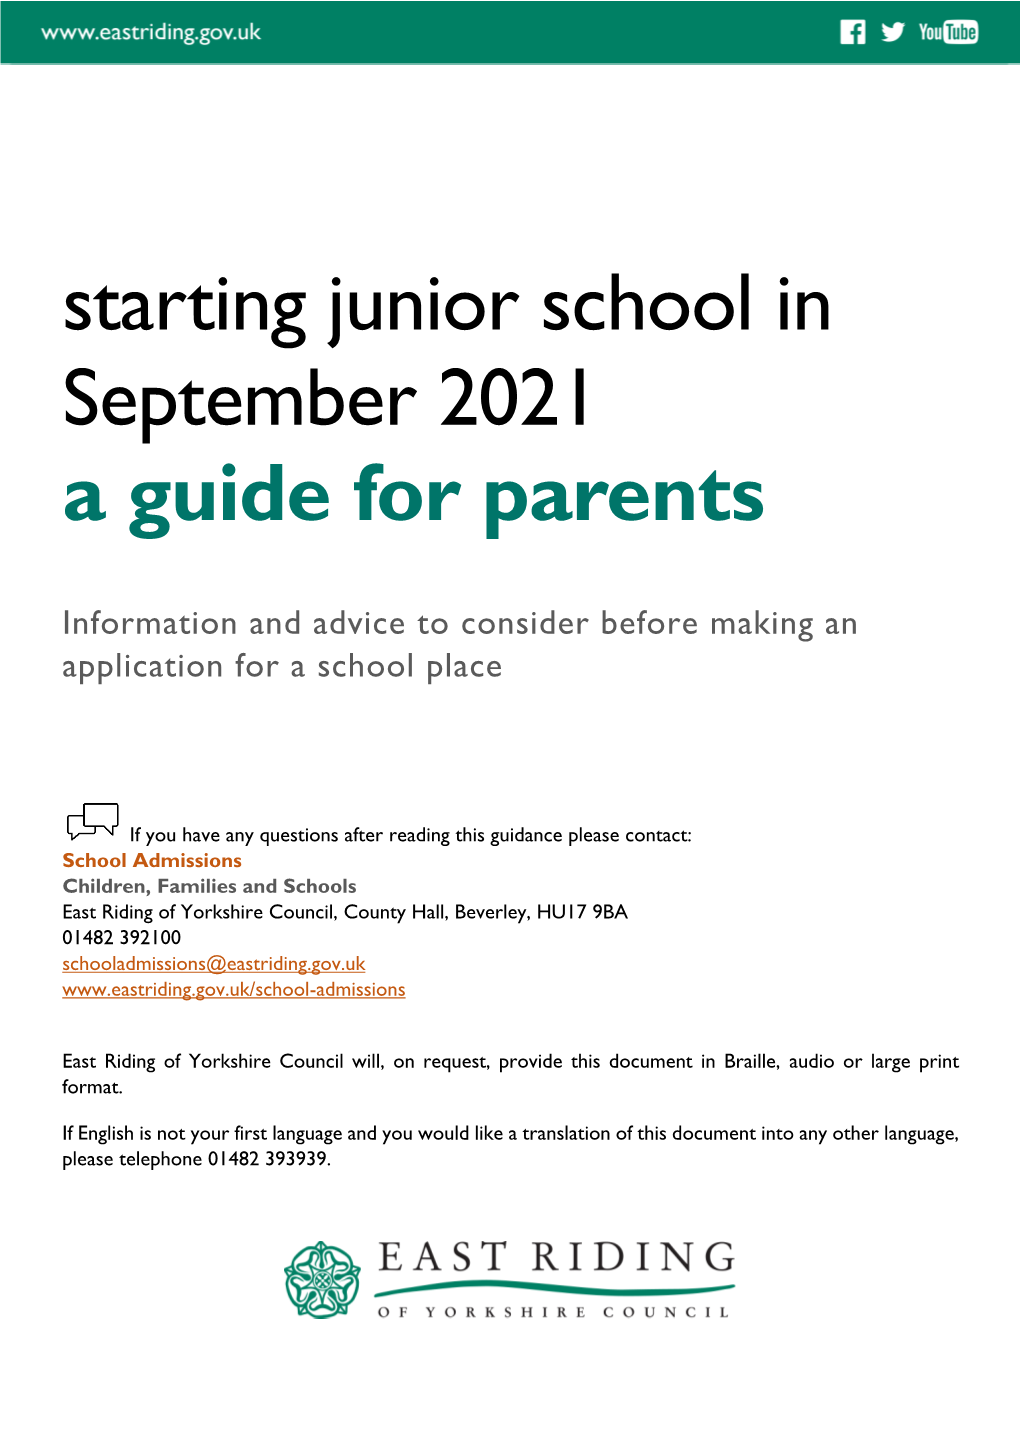 Starting Junior School in September 2021 a Guide for Parents